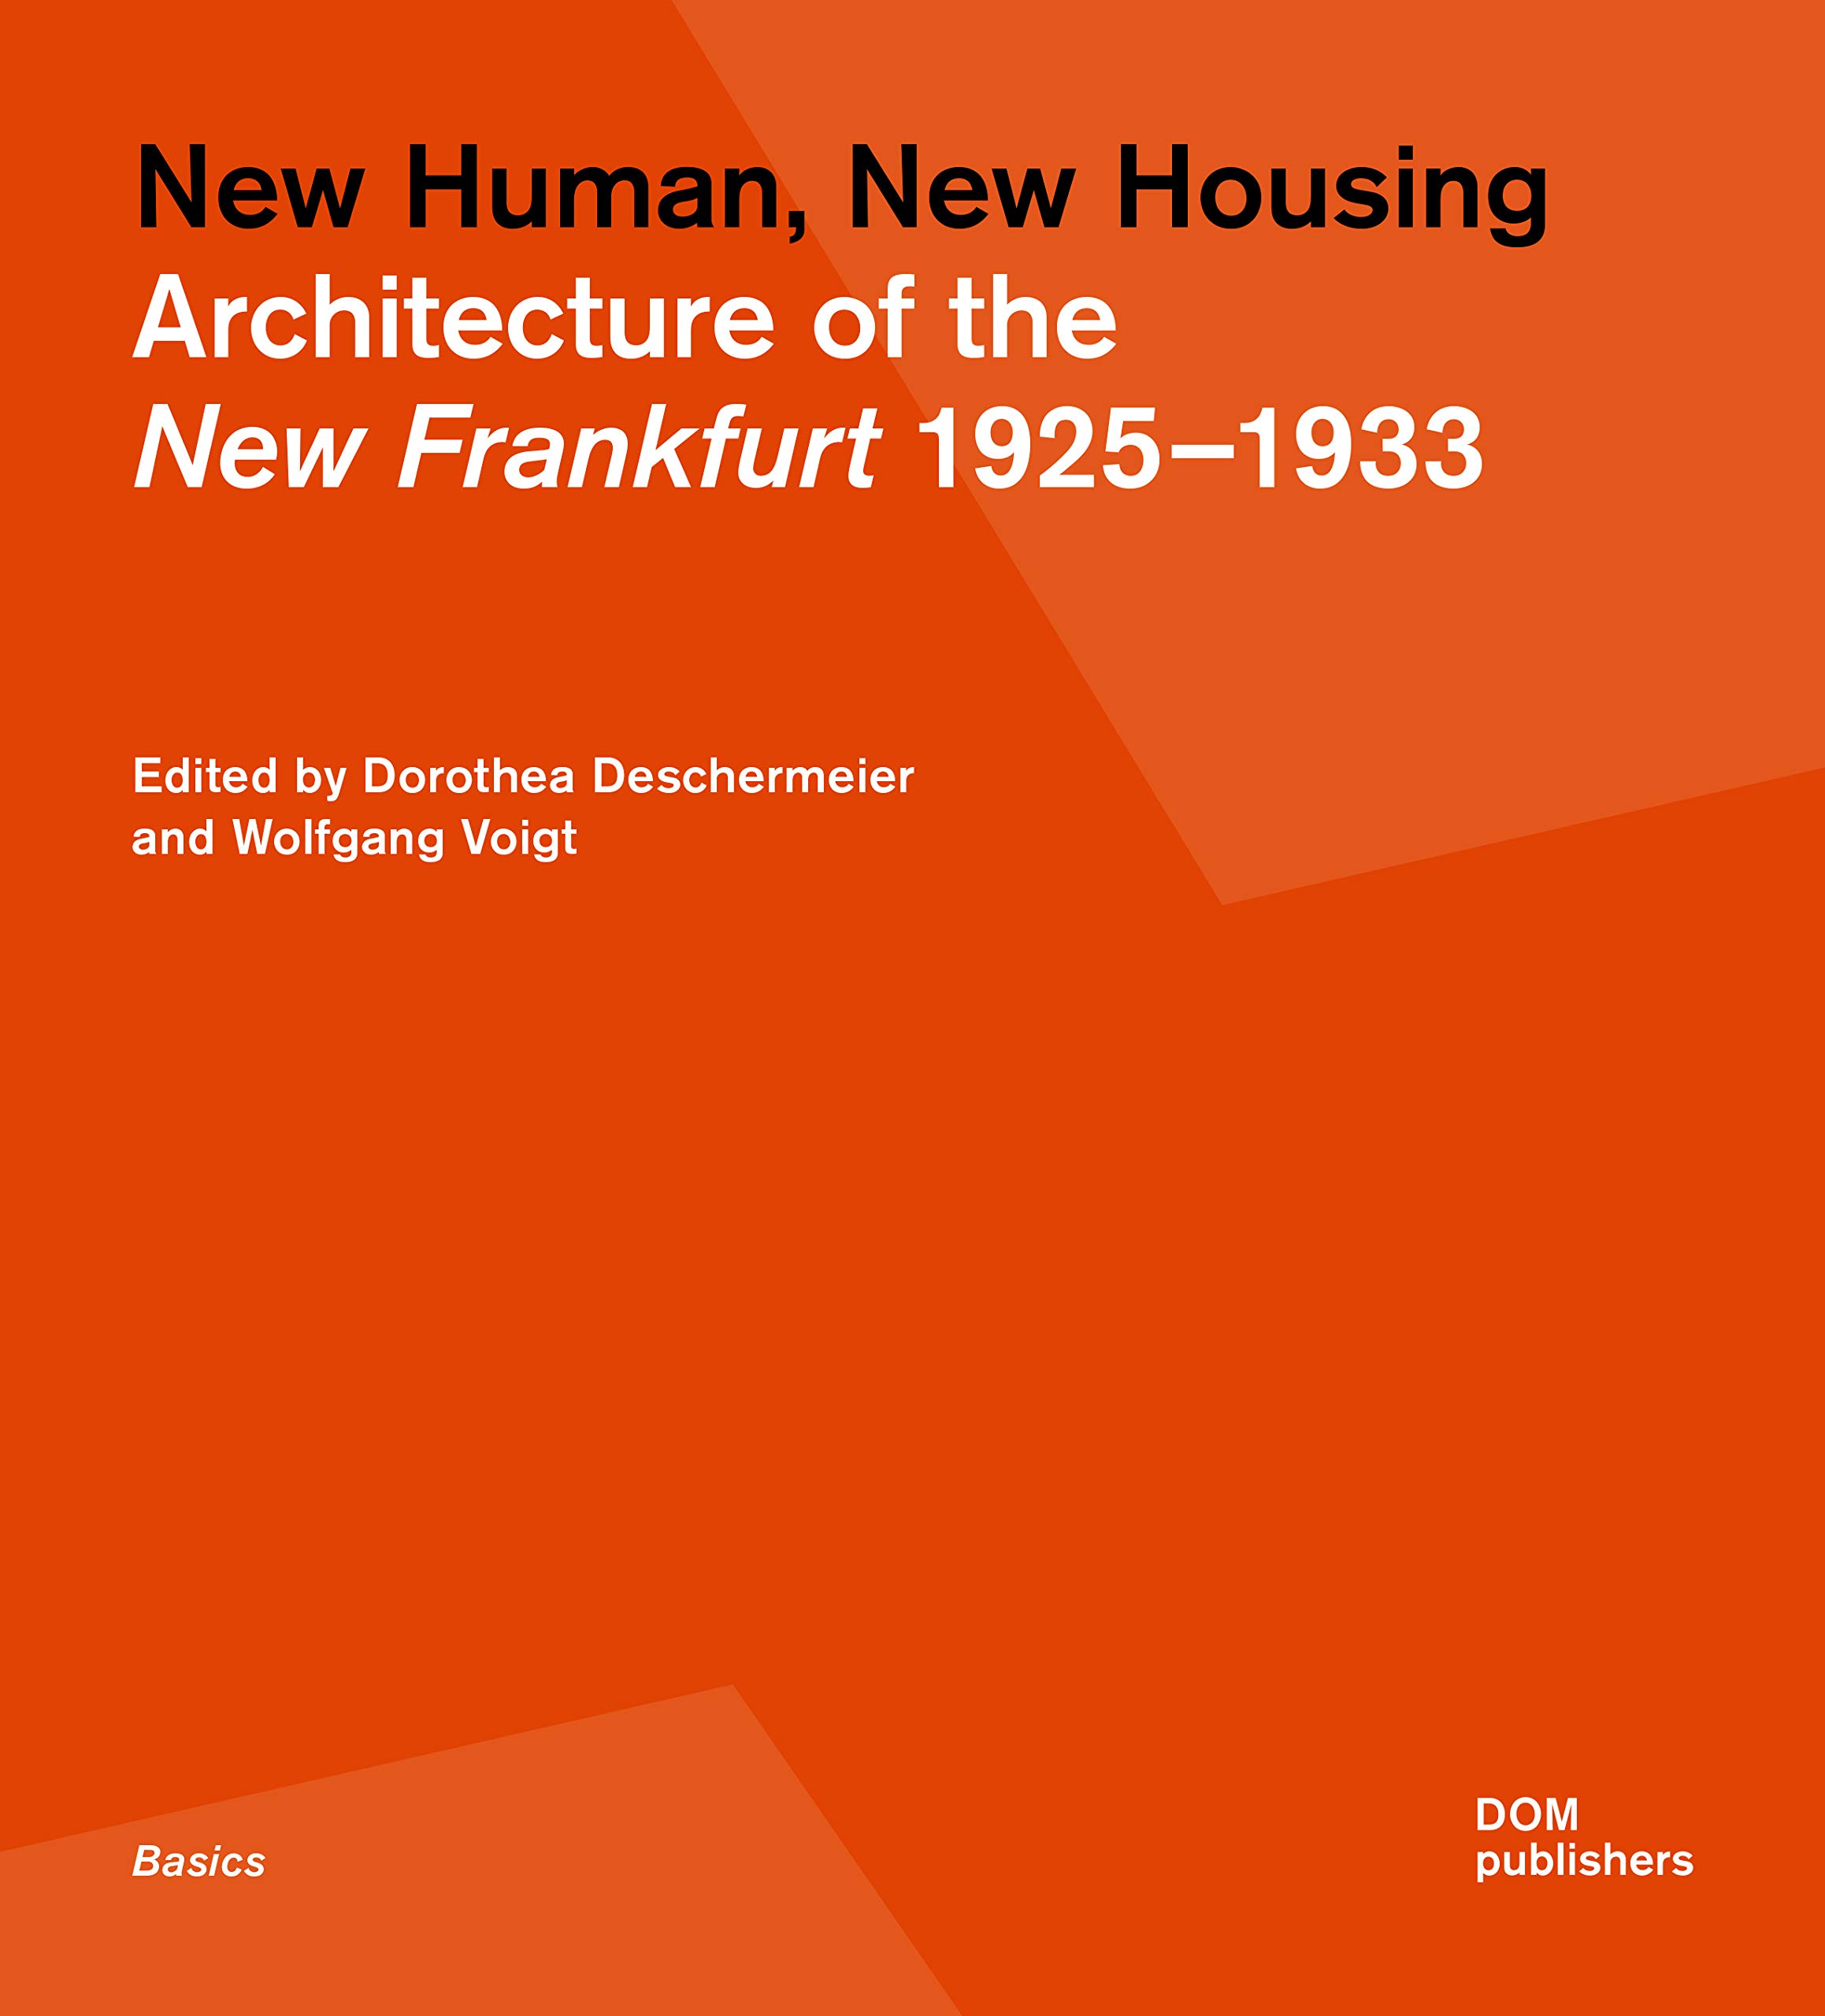 New Human, New Housing: Architecture of the New Frankfurt 1925-1933